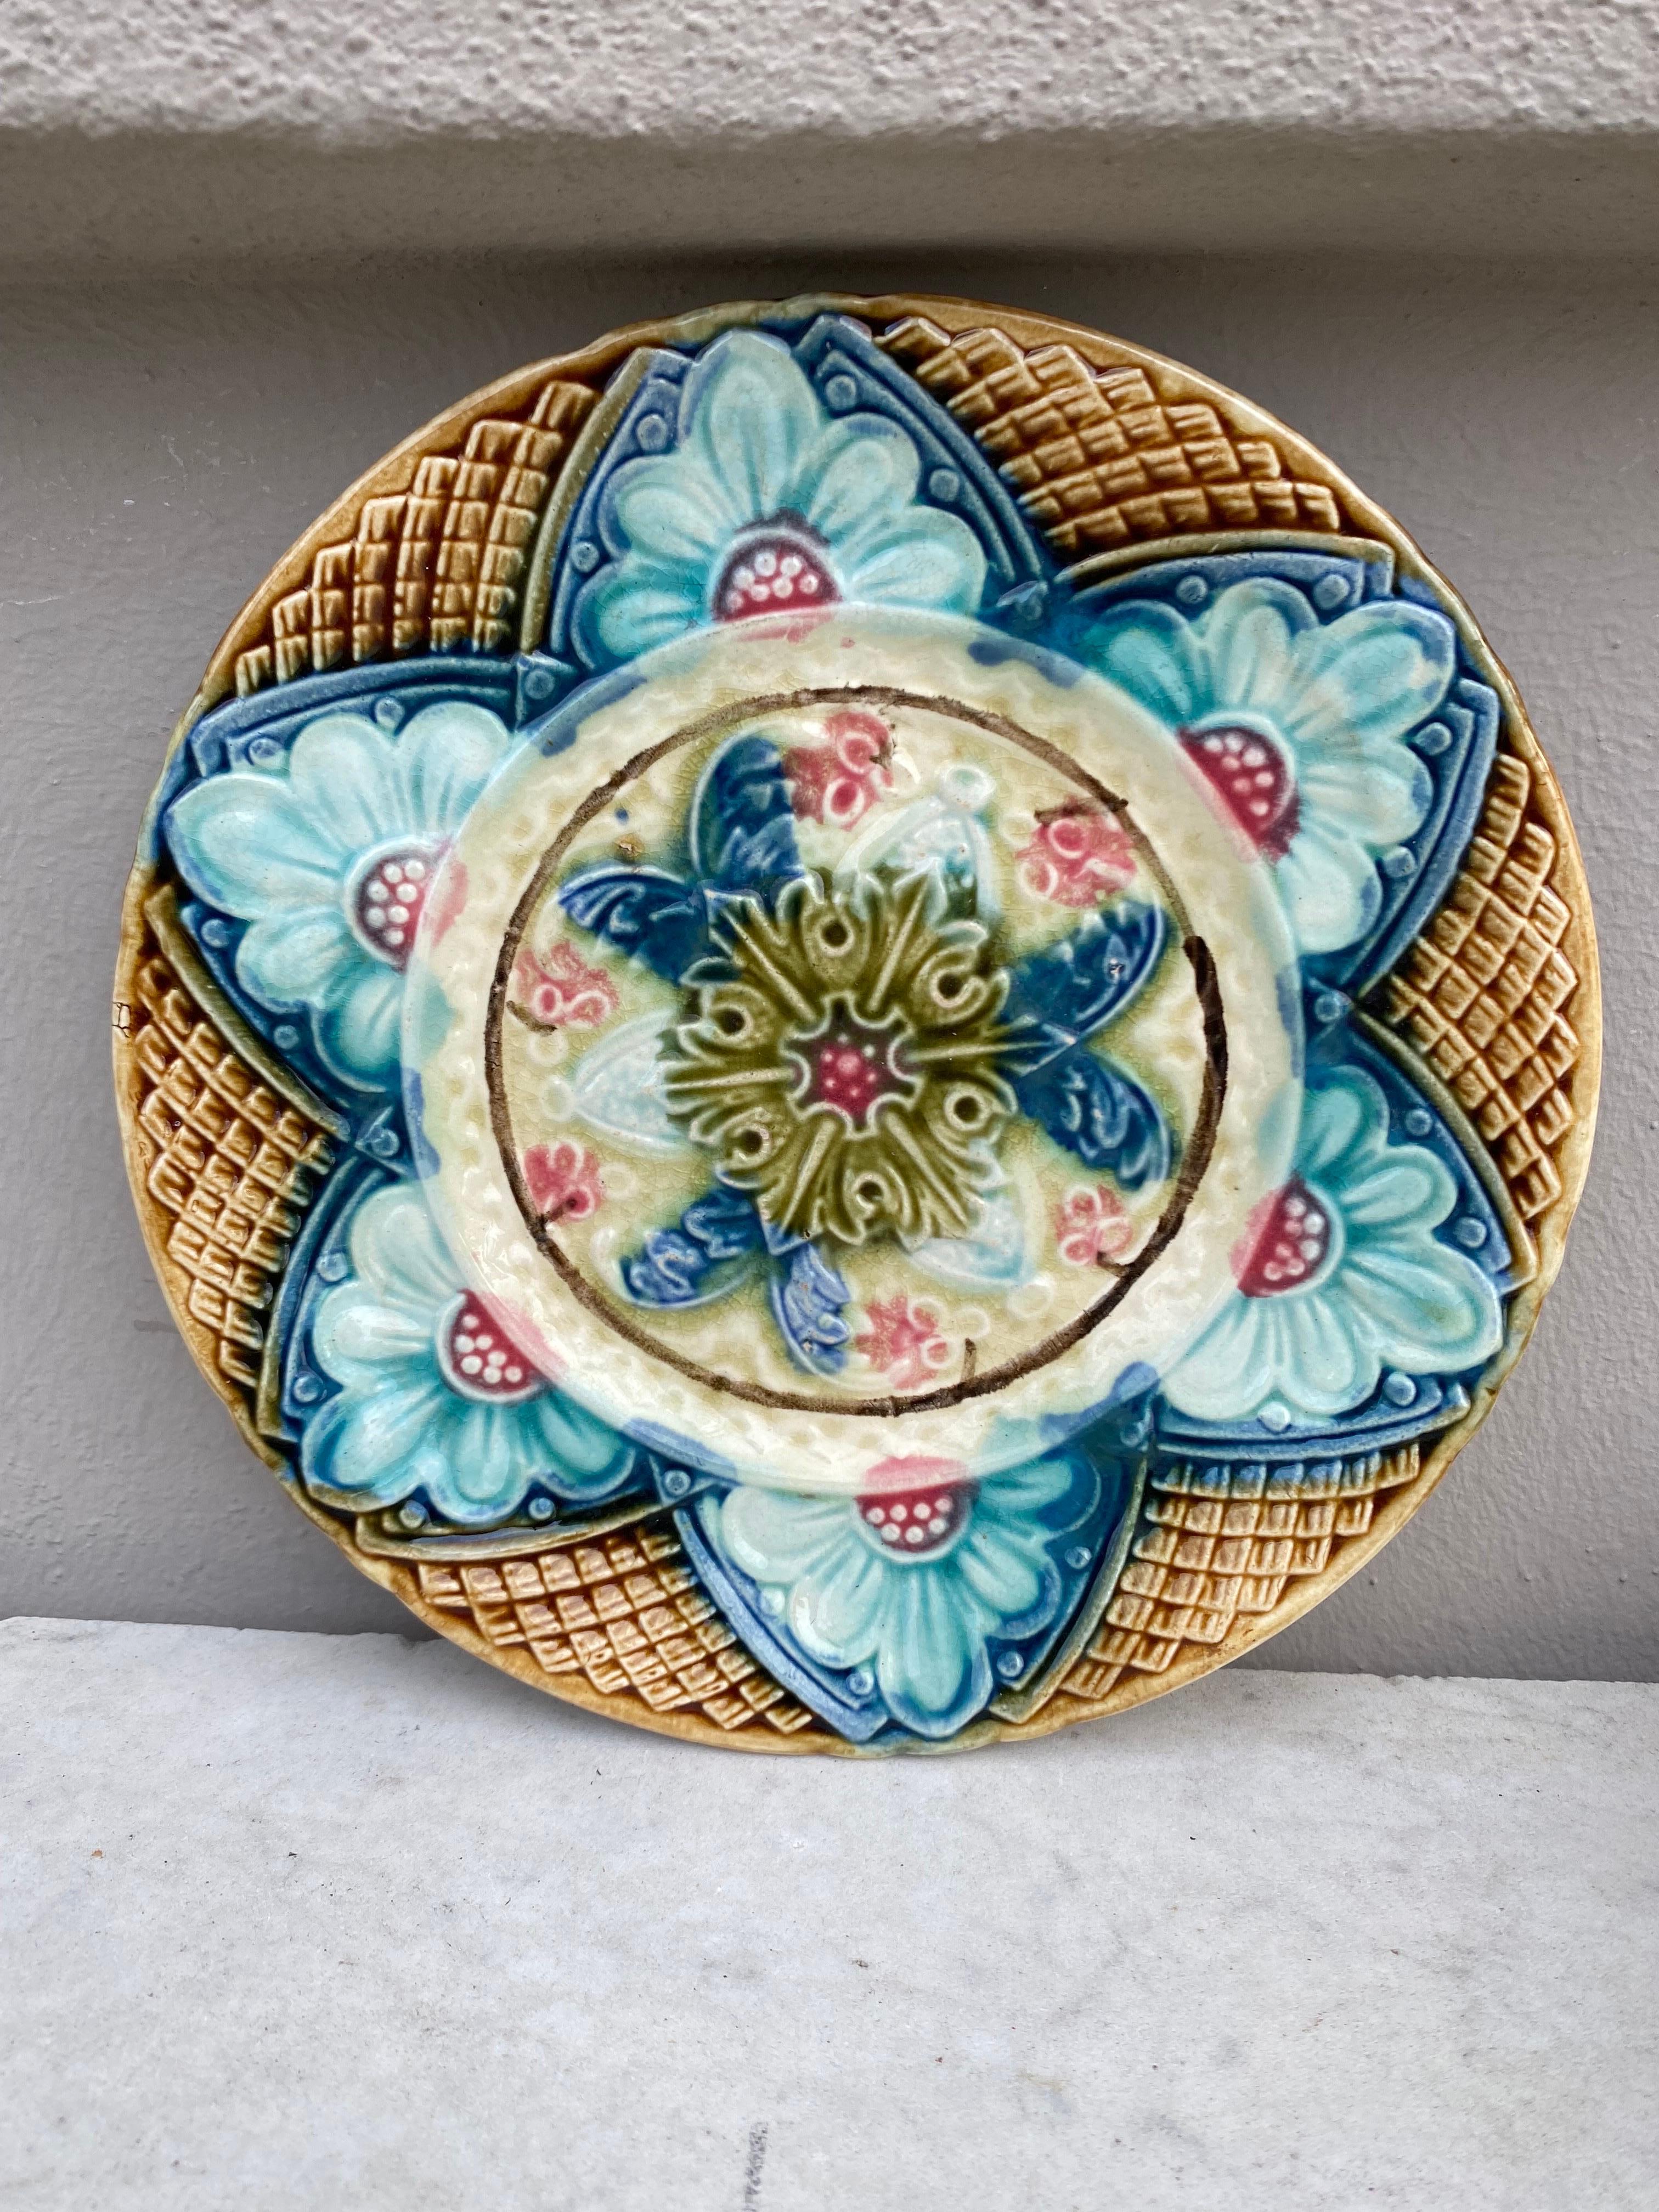 French Majolica plate Onnaing Circa 1890.
Floral and geometrical pattern.